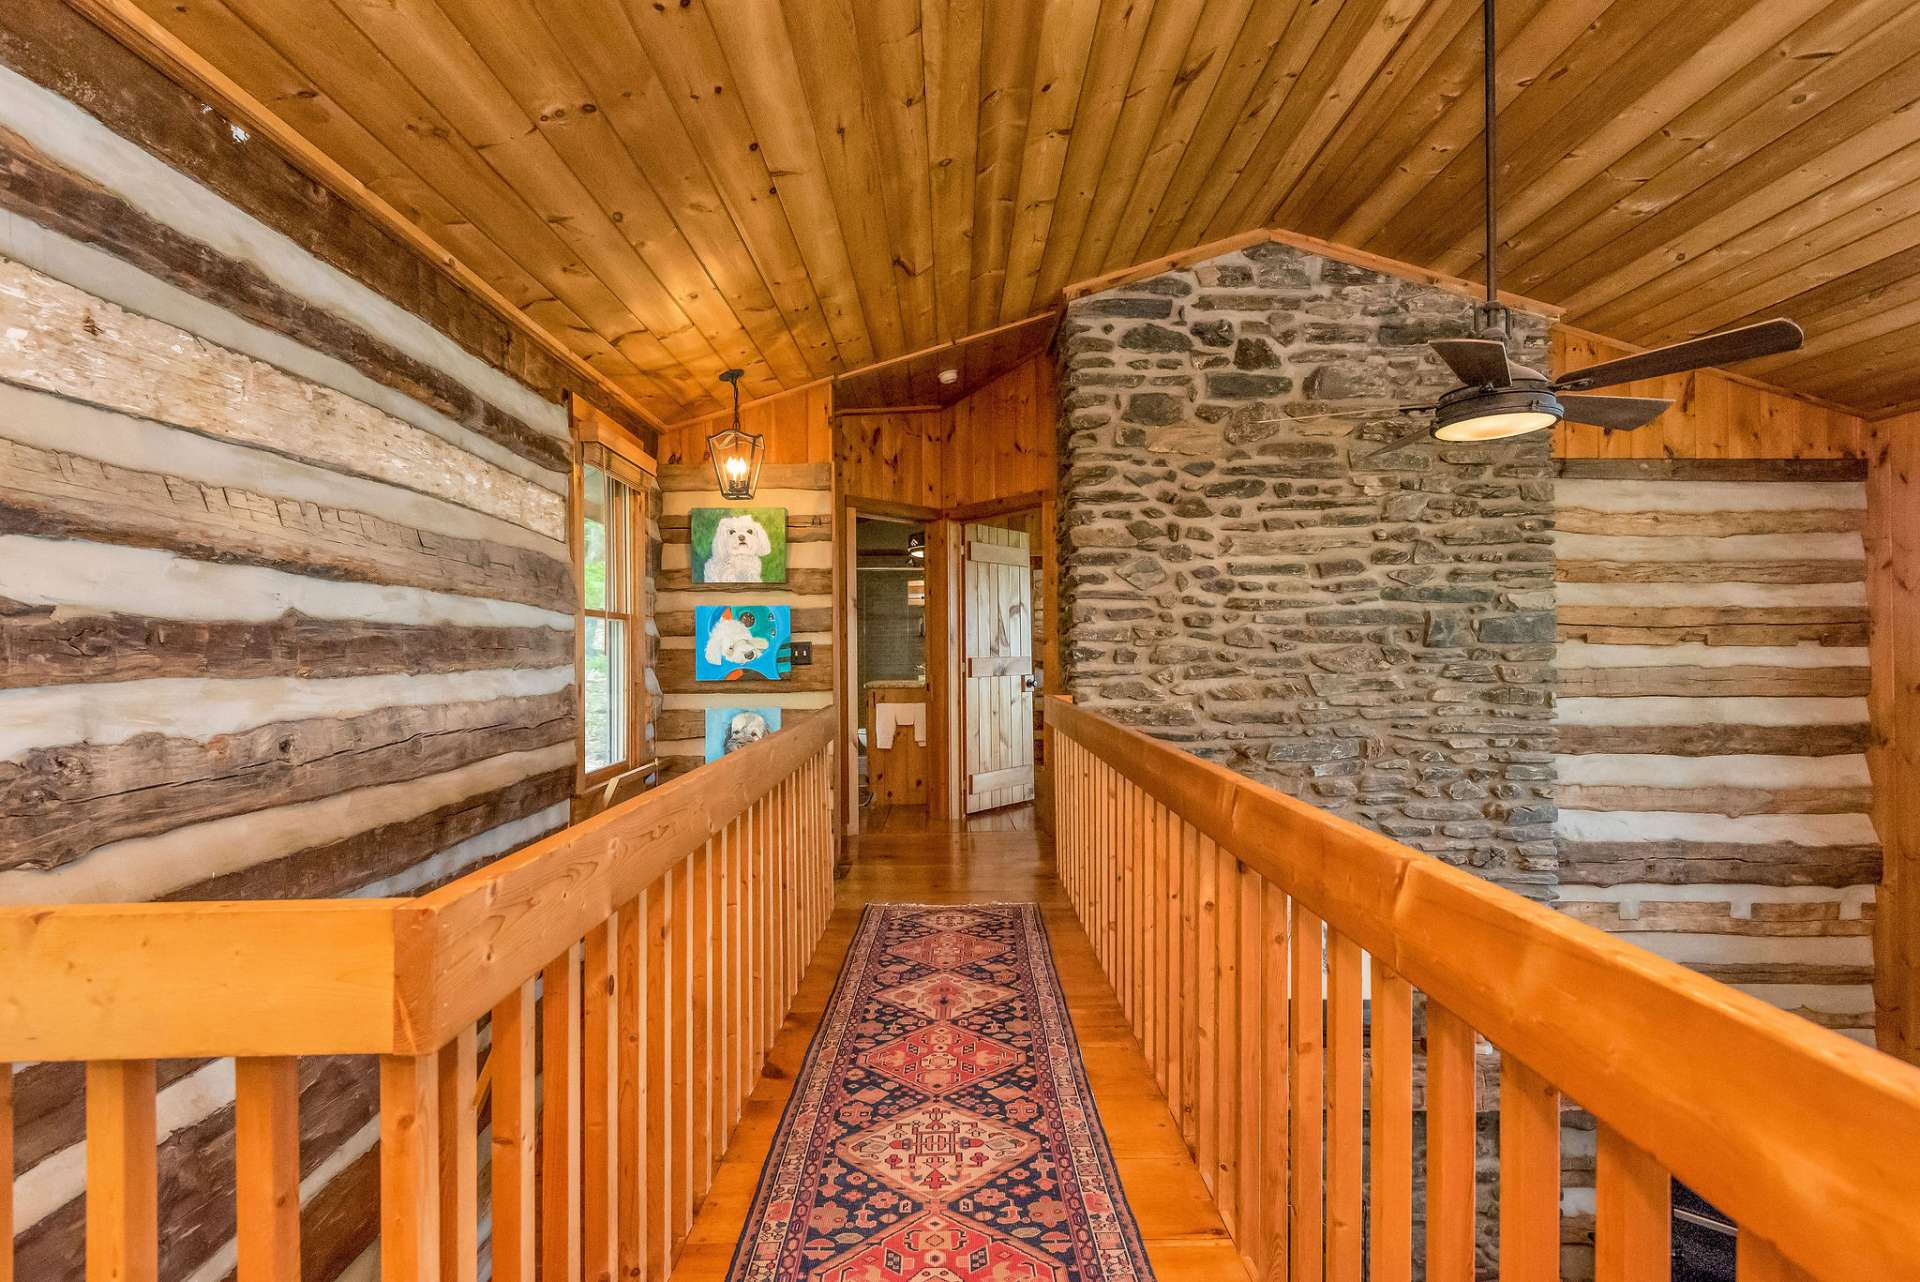 Catwalk takes you to the bonus room with a barn door and separate loft with a tree house view.